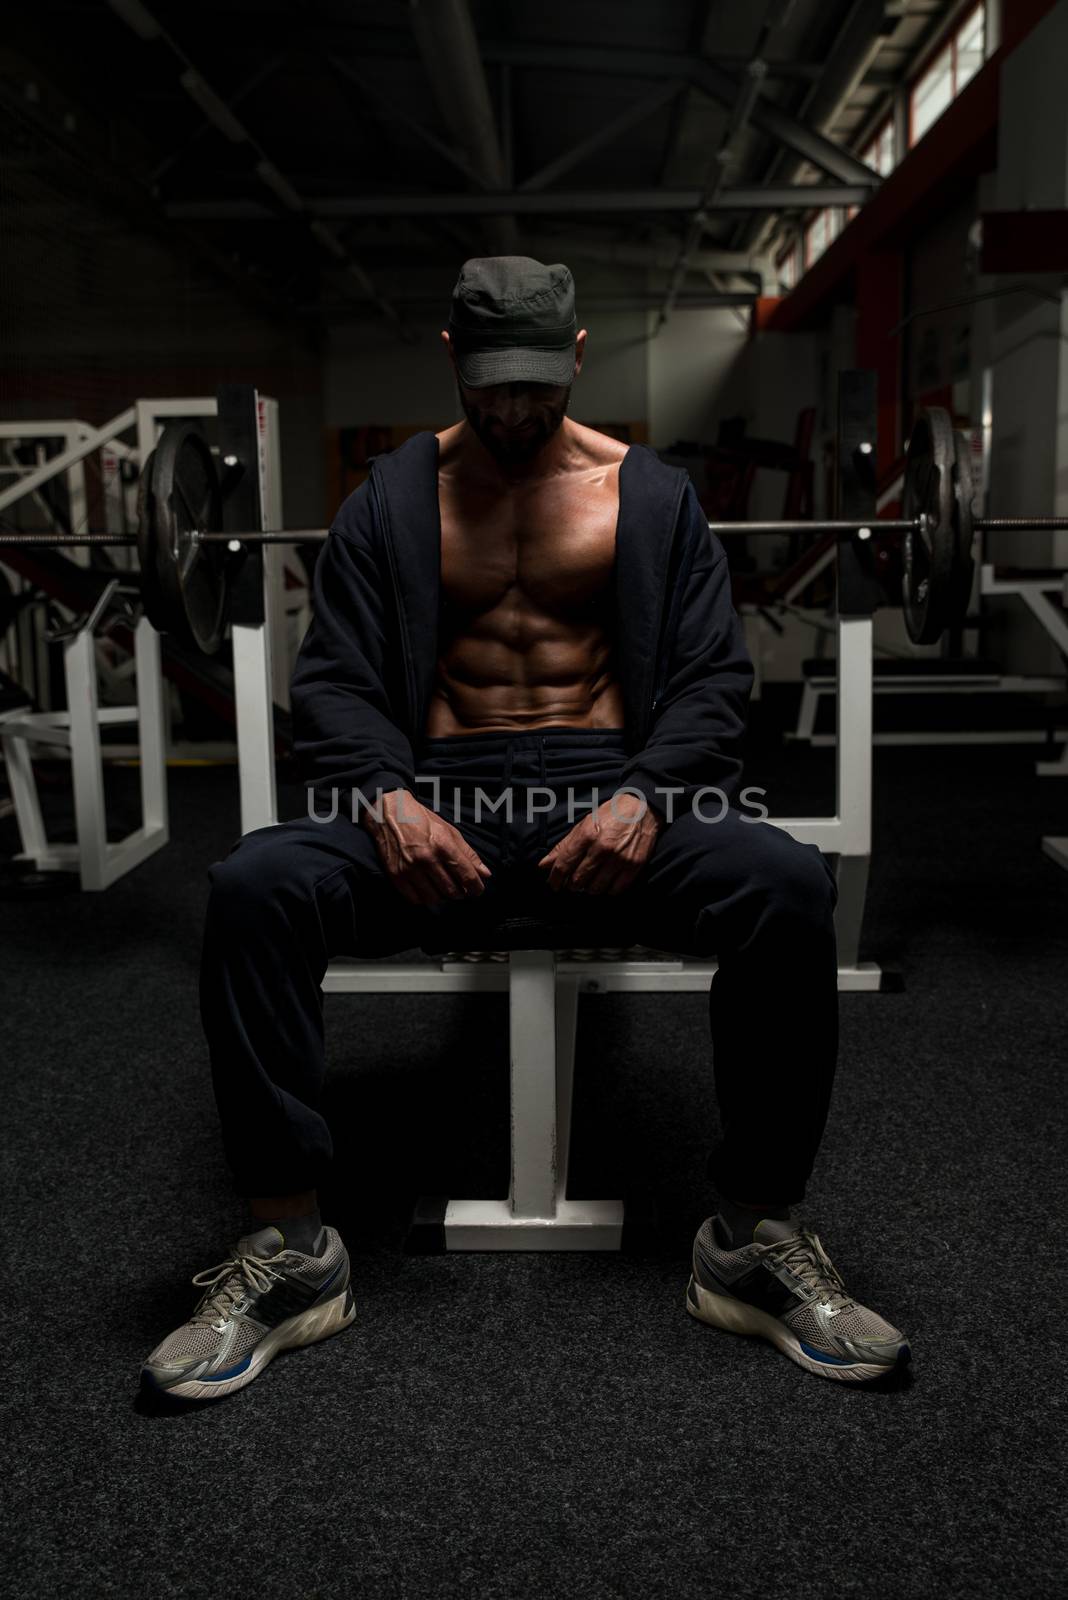 Portrait Of A Physically Fit Mature Man In A Healthy Club With Dramatic Lighting